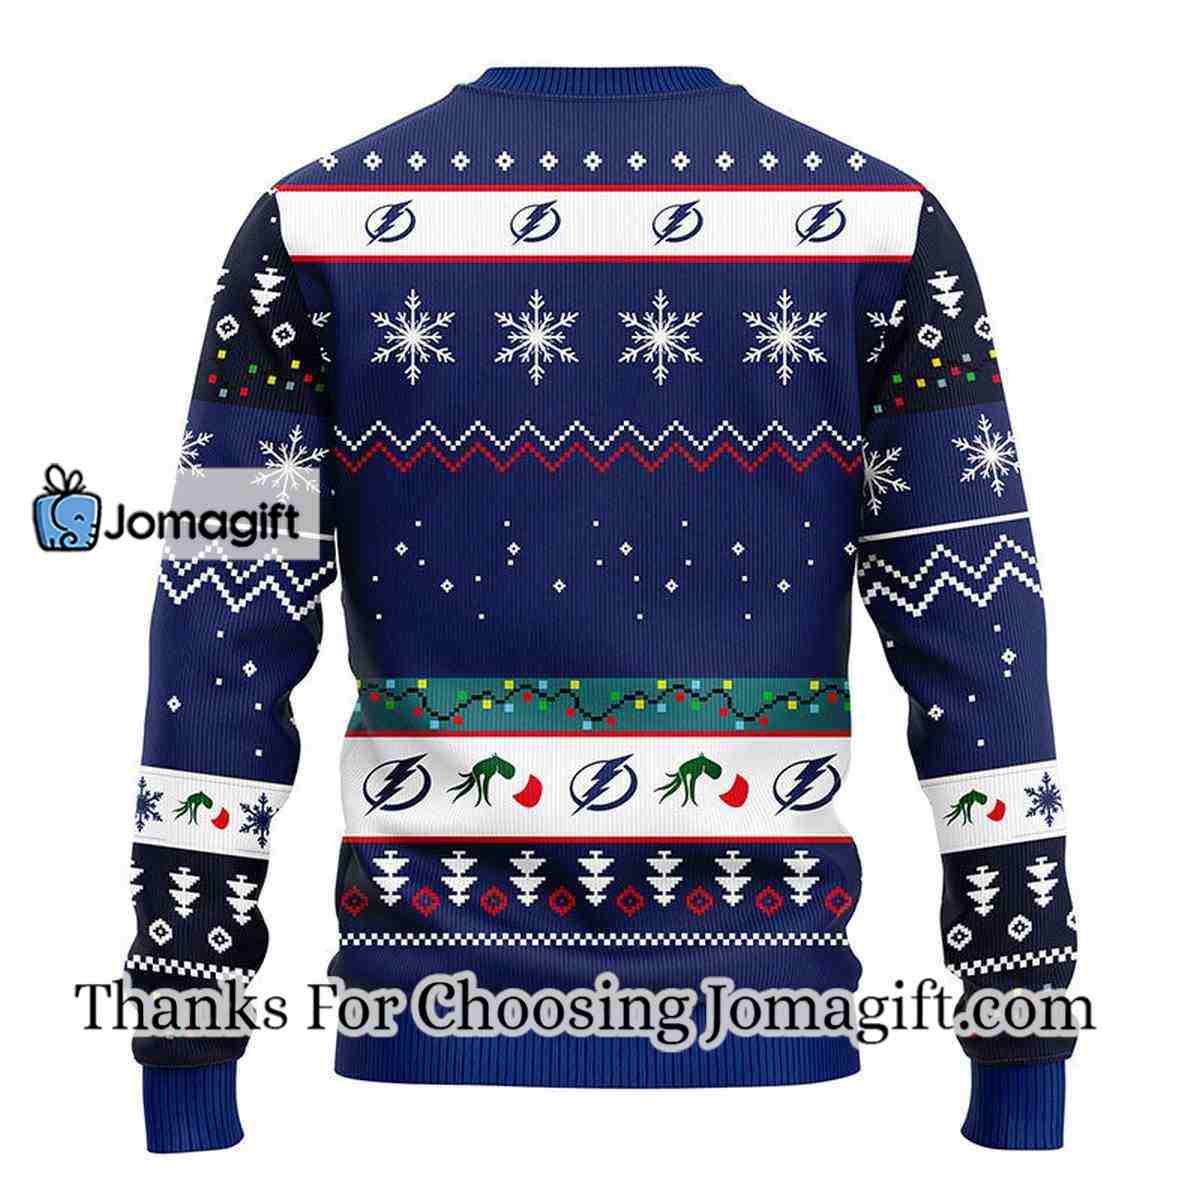 Tampa Bay Lightning 12 Grinch Xmas Day Christmas Ugly Sweater 2